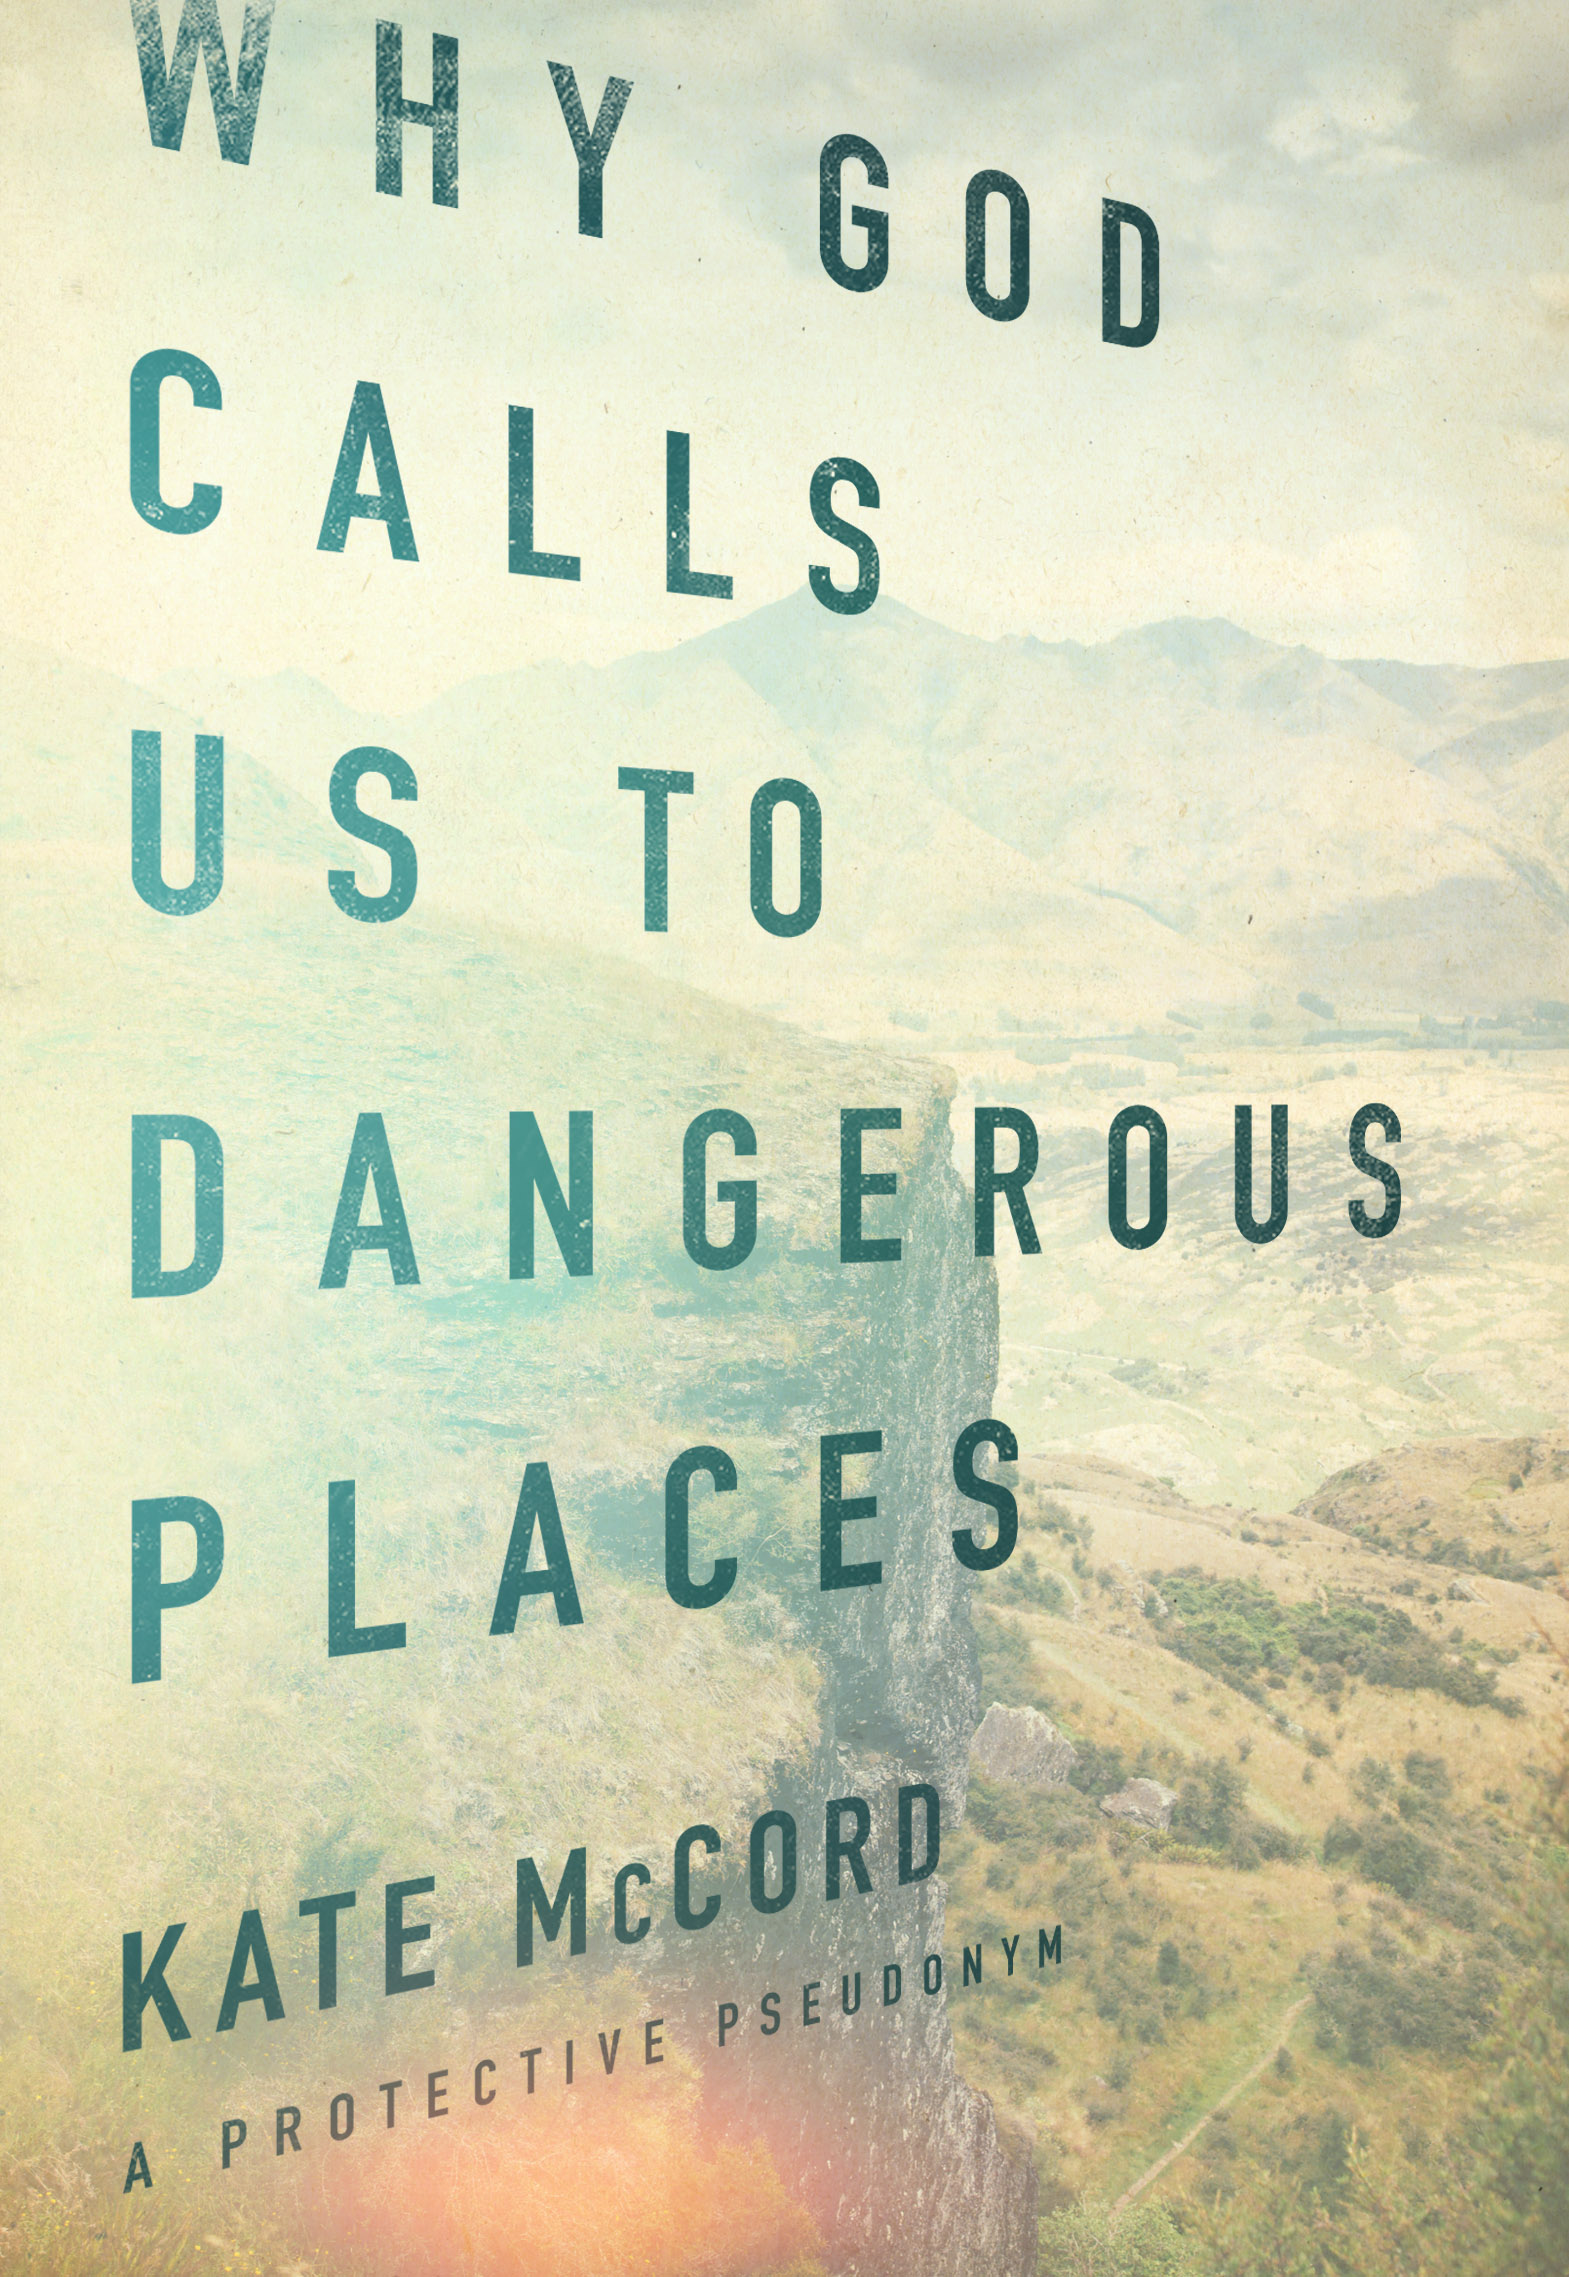 Why God Calls Us to Dangerous Places - Book review